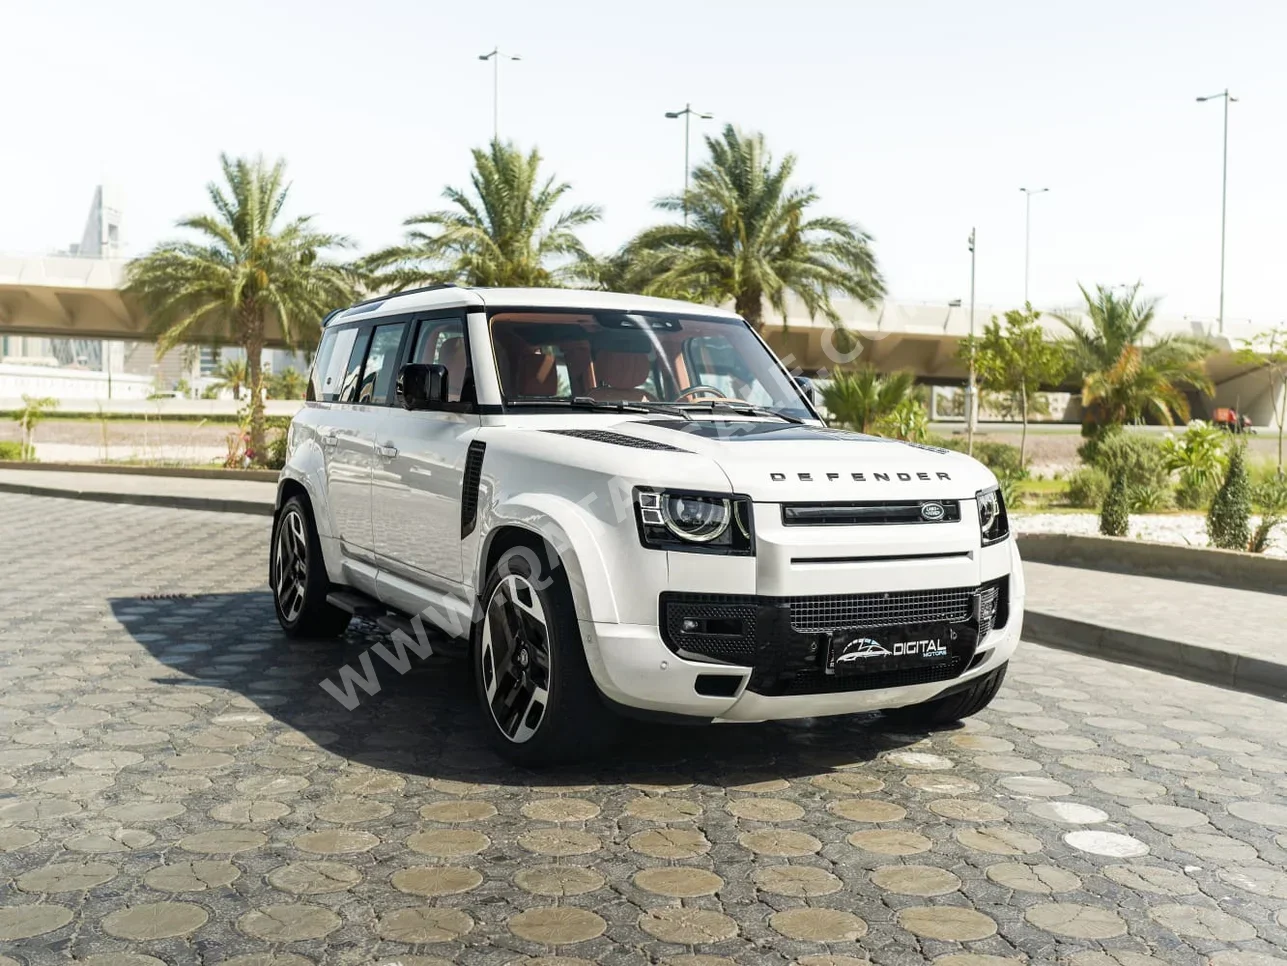 Land Rover  Defender  2020  Automatic  81,000 Km  6 Cylinder  Four Wheel Drive (4WD)  SUV  White